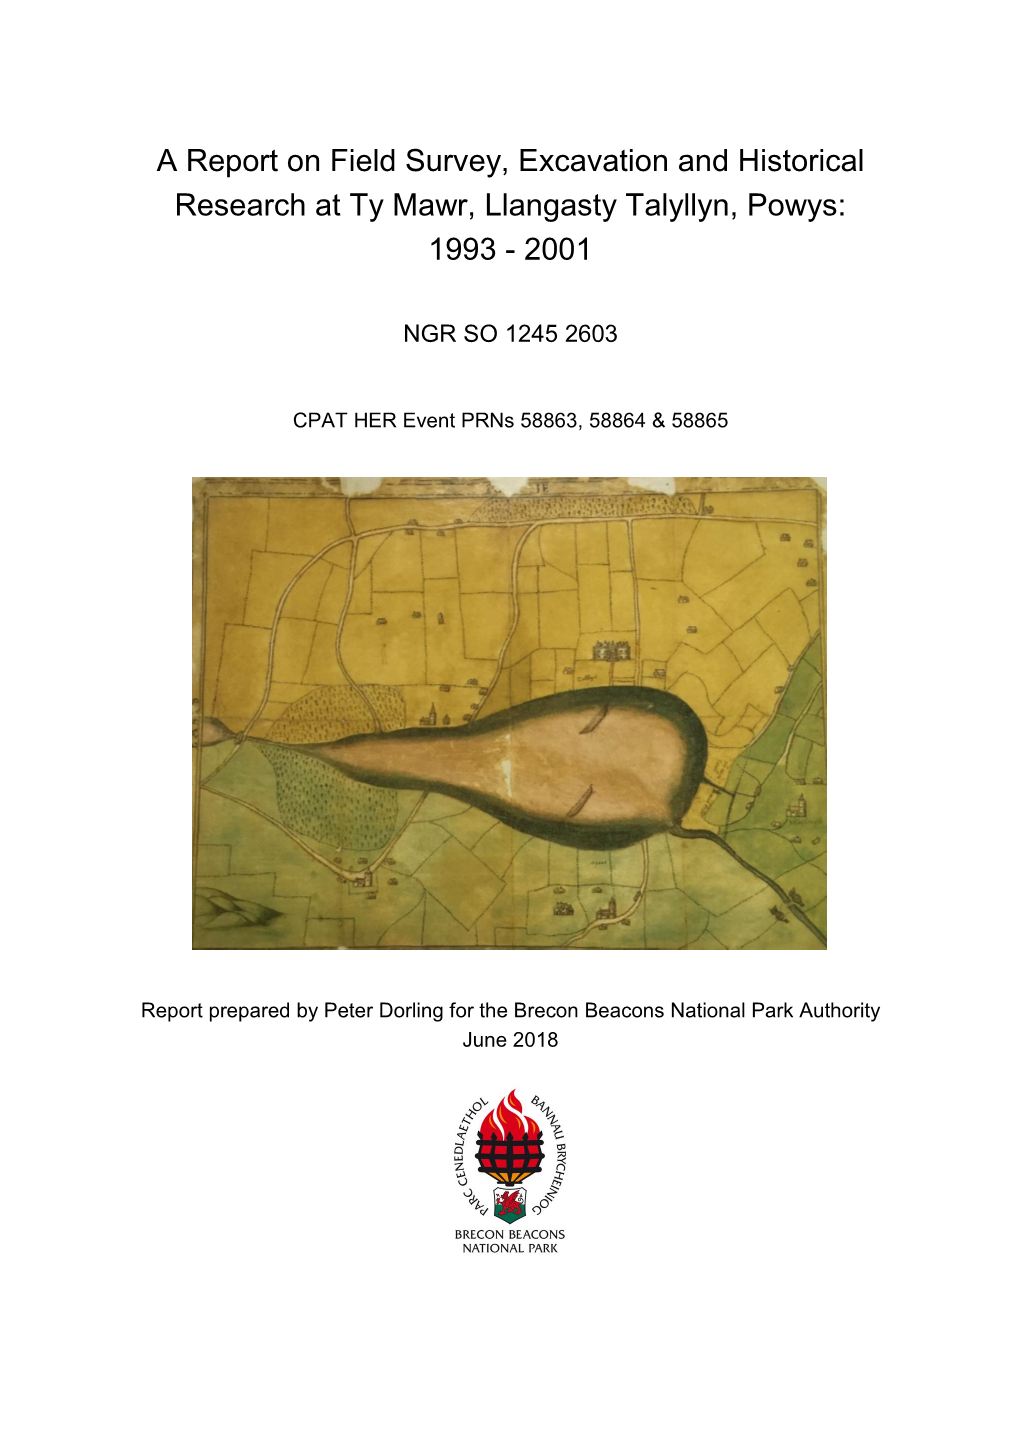 A Report on Field Survey, Excavation and Historical Research at Ty Mawr, Llangasty Talyllyn, Powys: 1993 - 2001